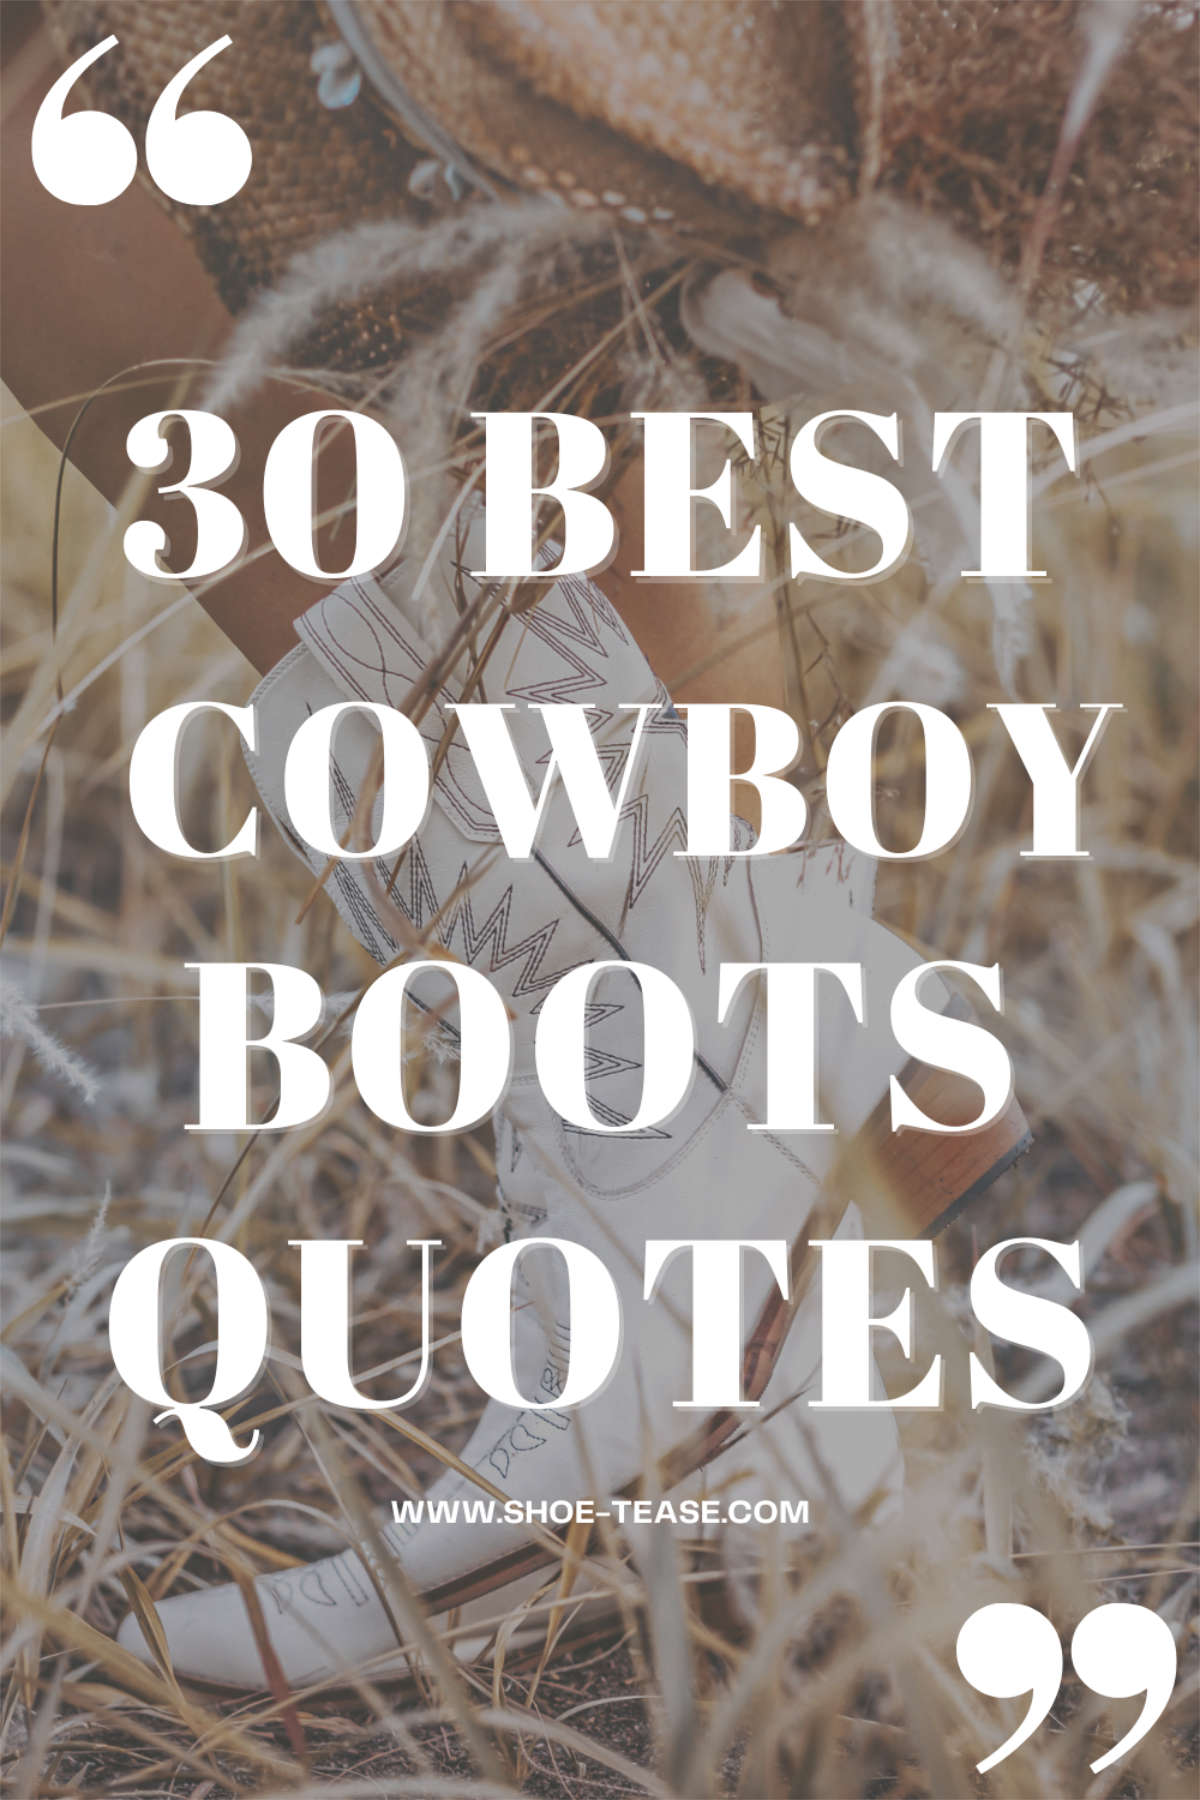 Text 30 best cowboy boots quotes over close up of woman wearing white cowboy boots.